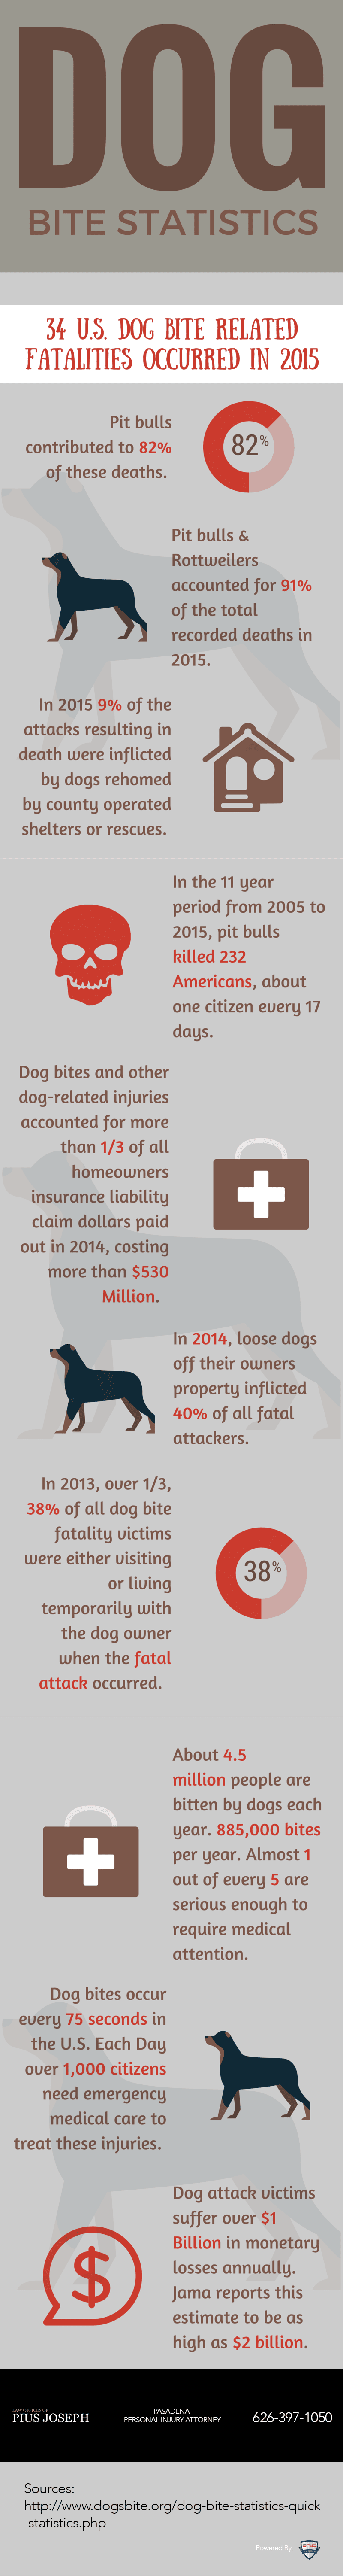 Stats about Serious Dog Bite Injuries [Infographic]